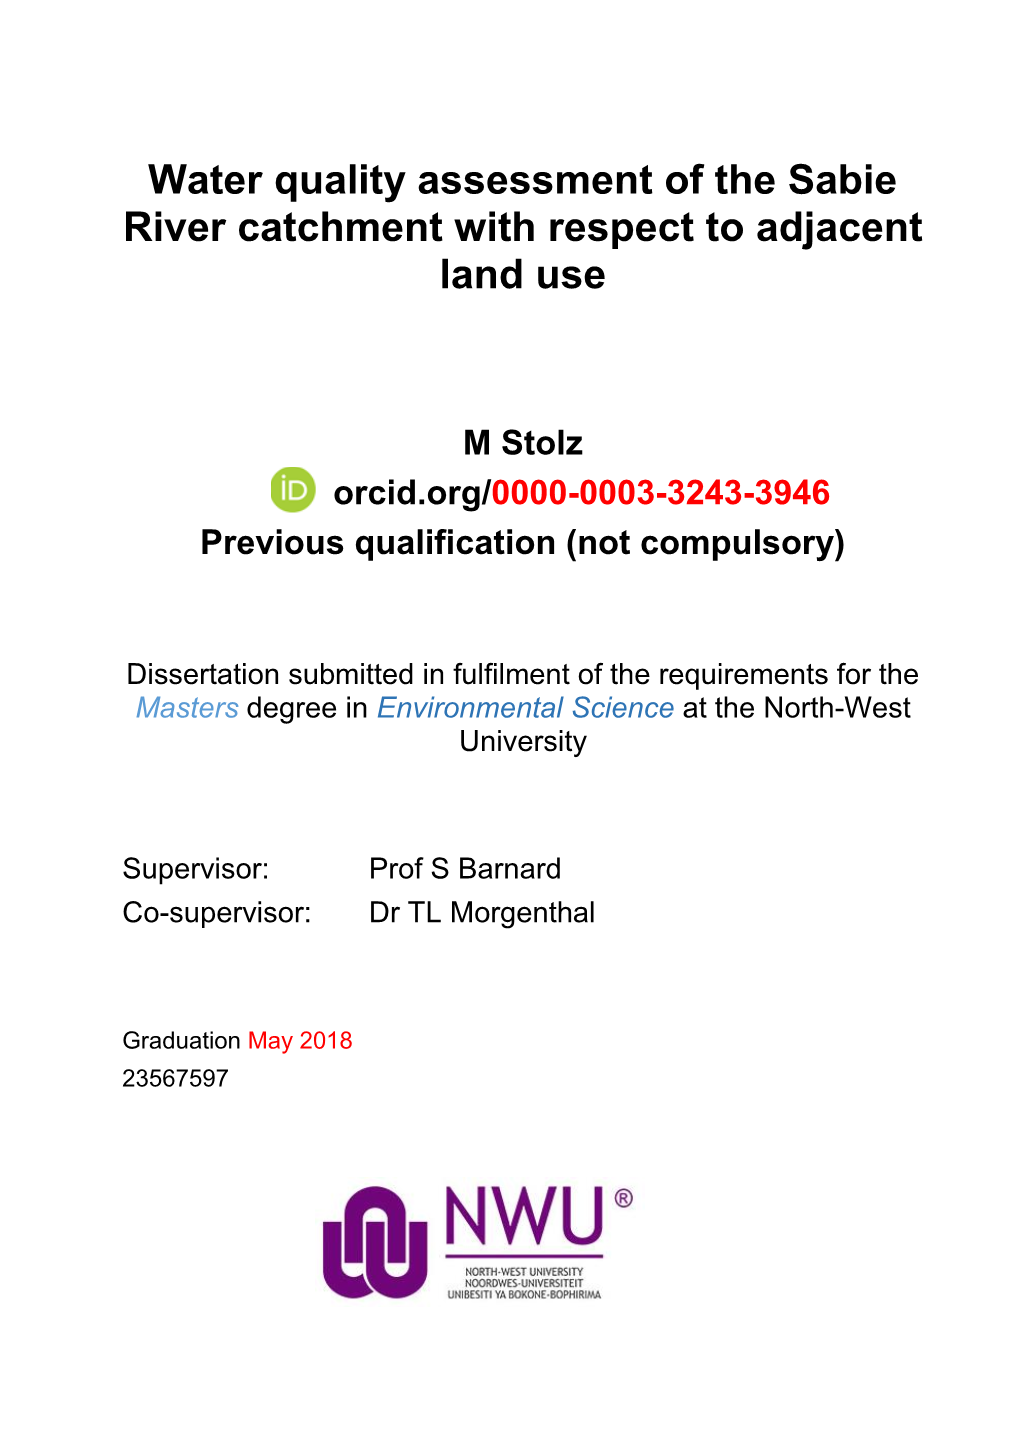 Water Quality Assessment of the Sabie River Catchment with Respect to Adjacent Land Use